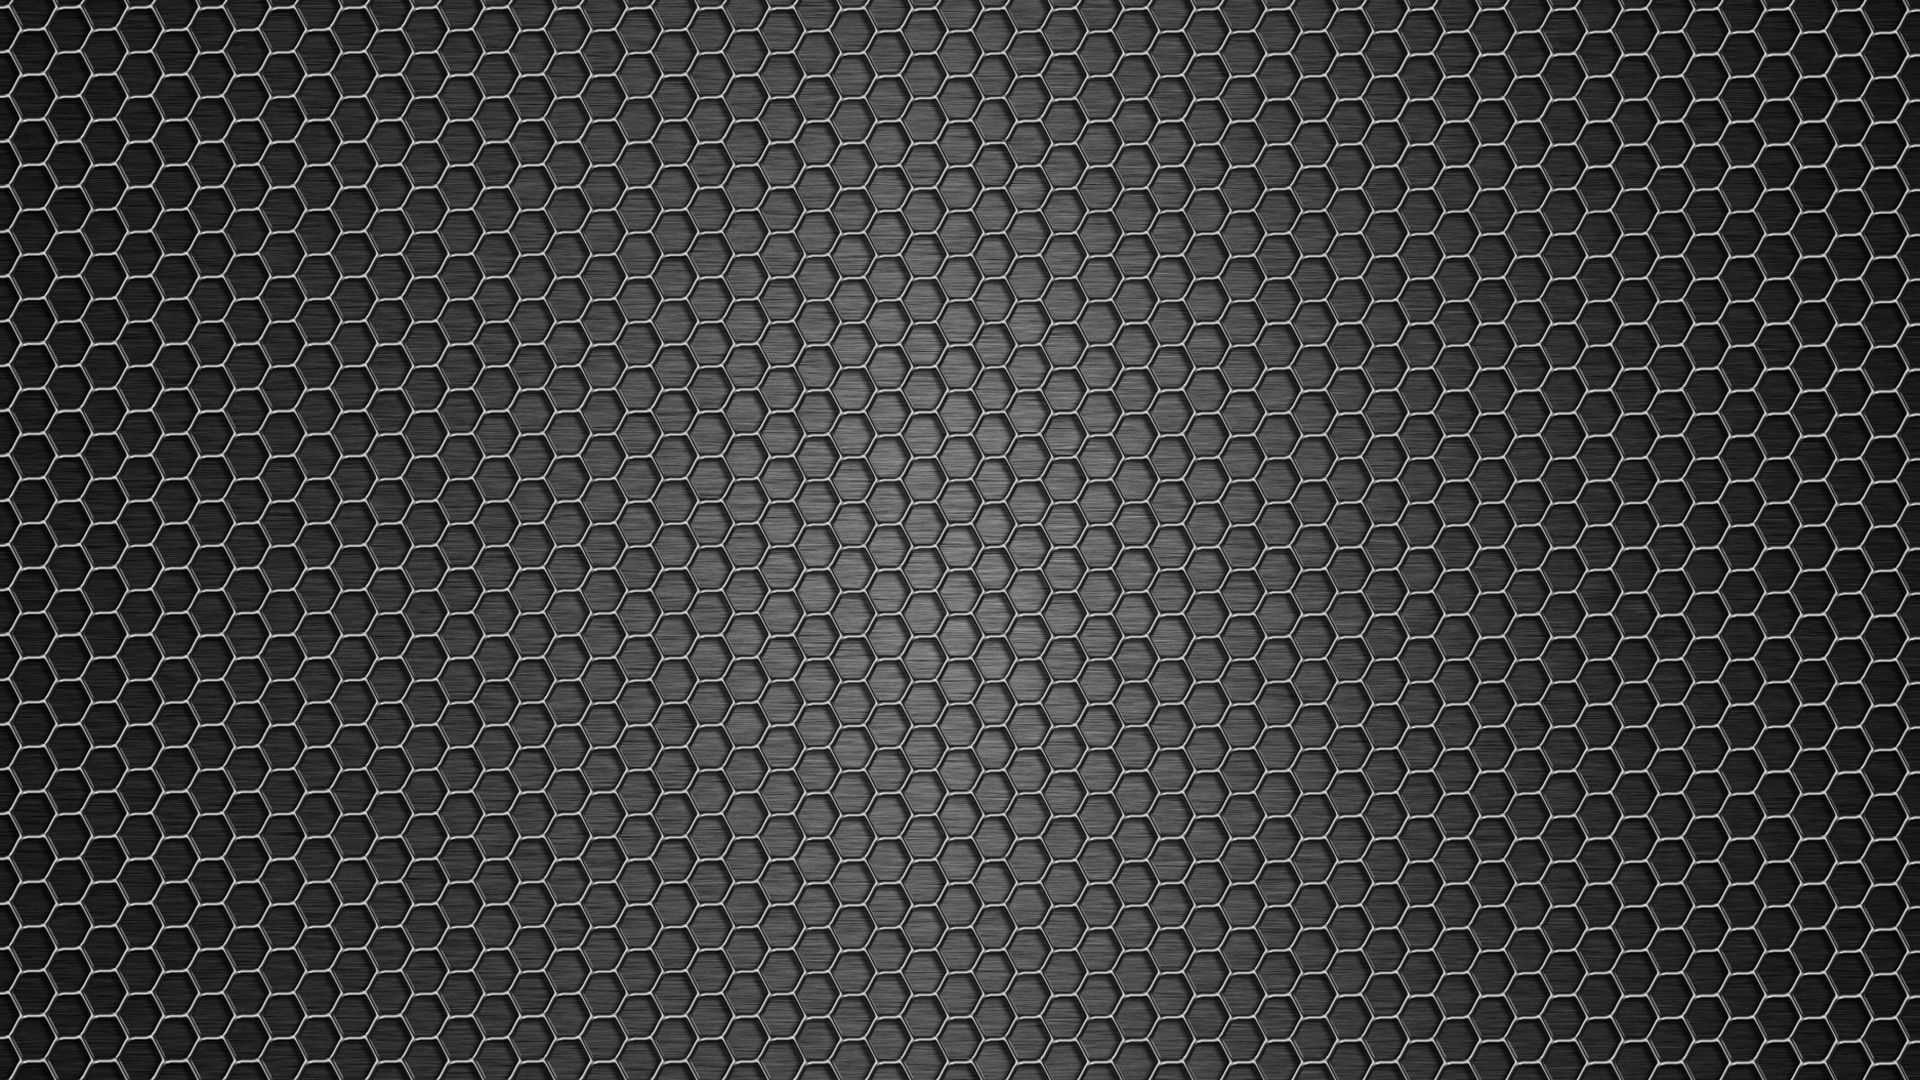 Grid HD for Phone